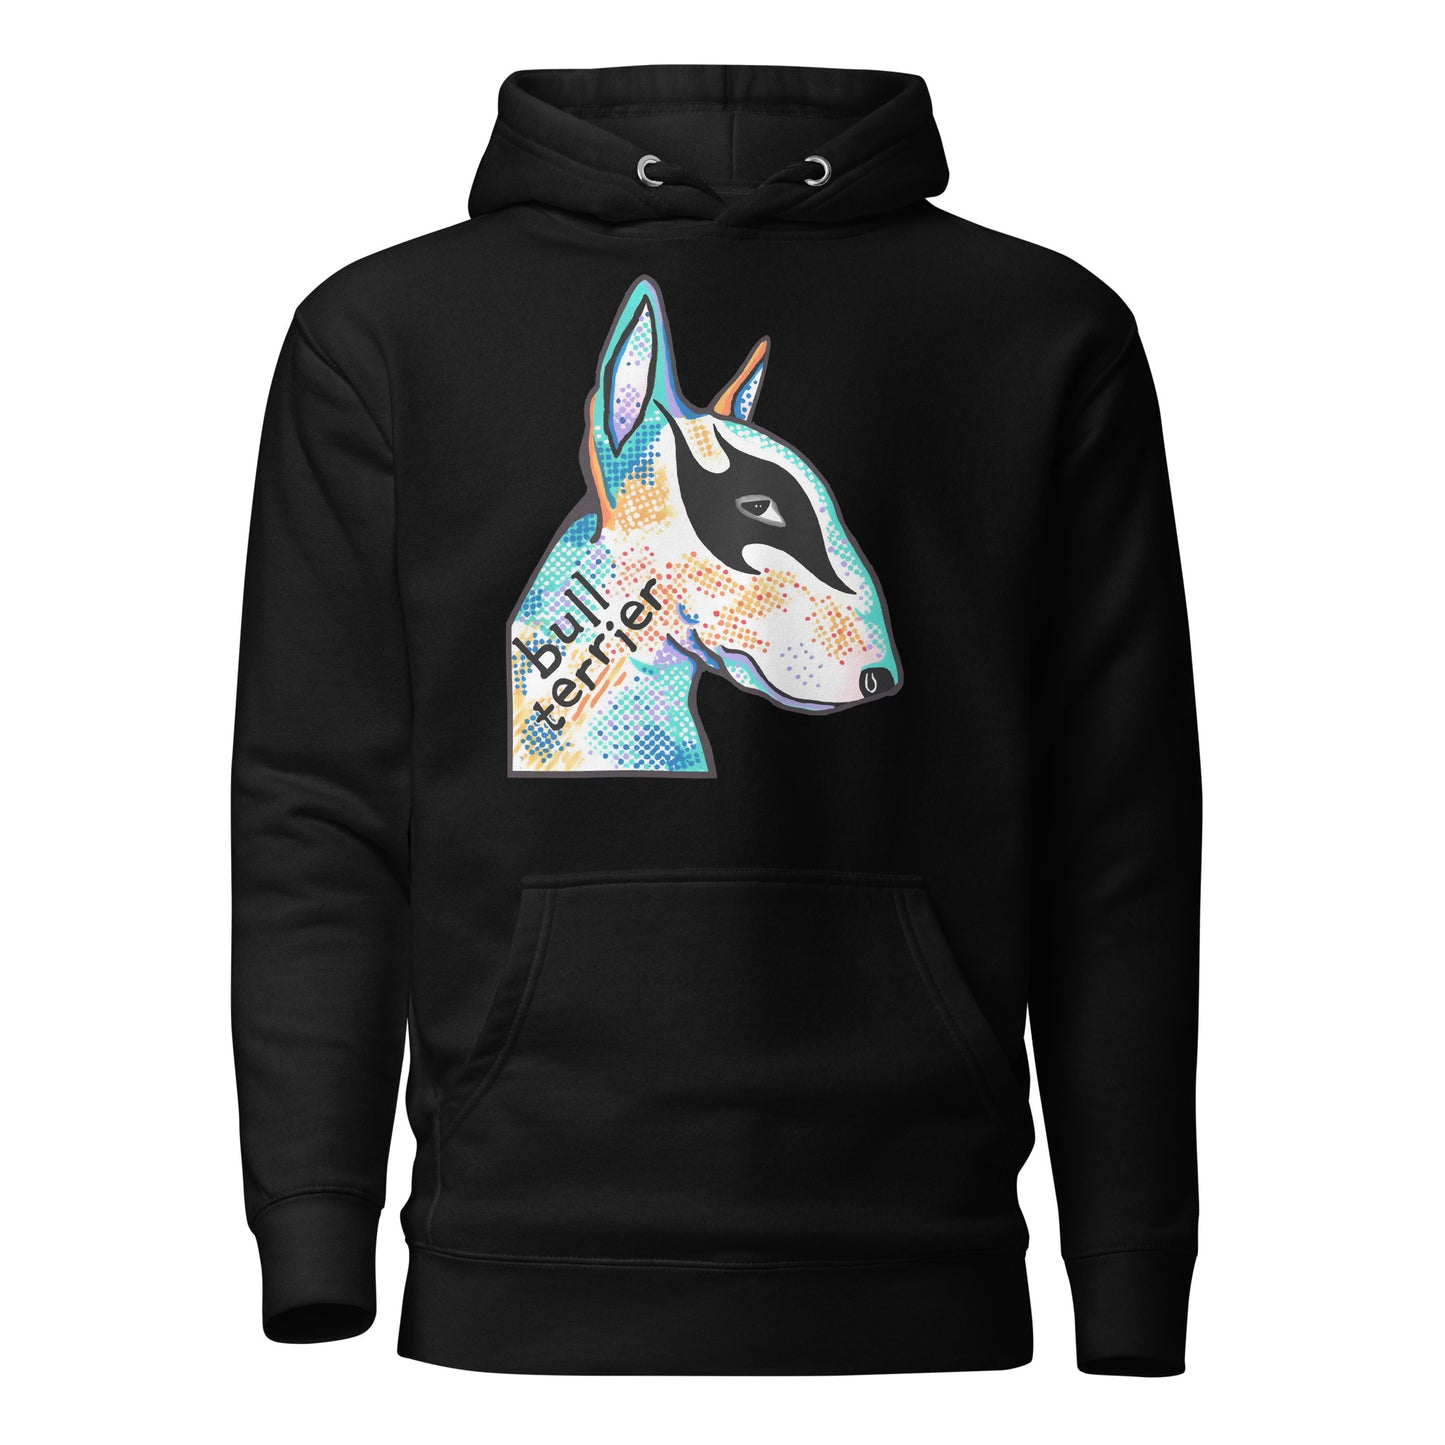 English Bull Terrier Unisex Hoodie by Dog Artistry